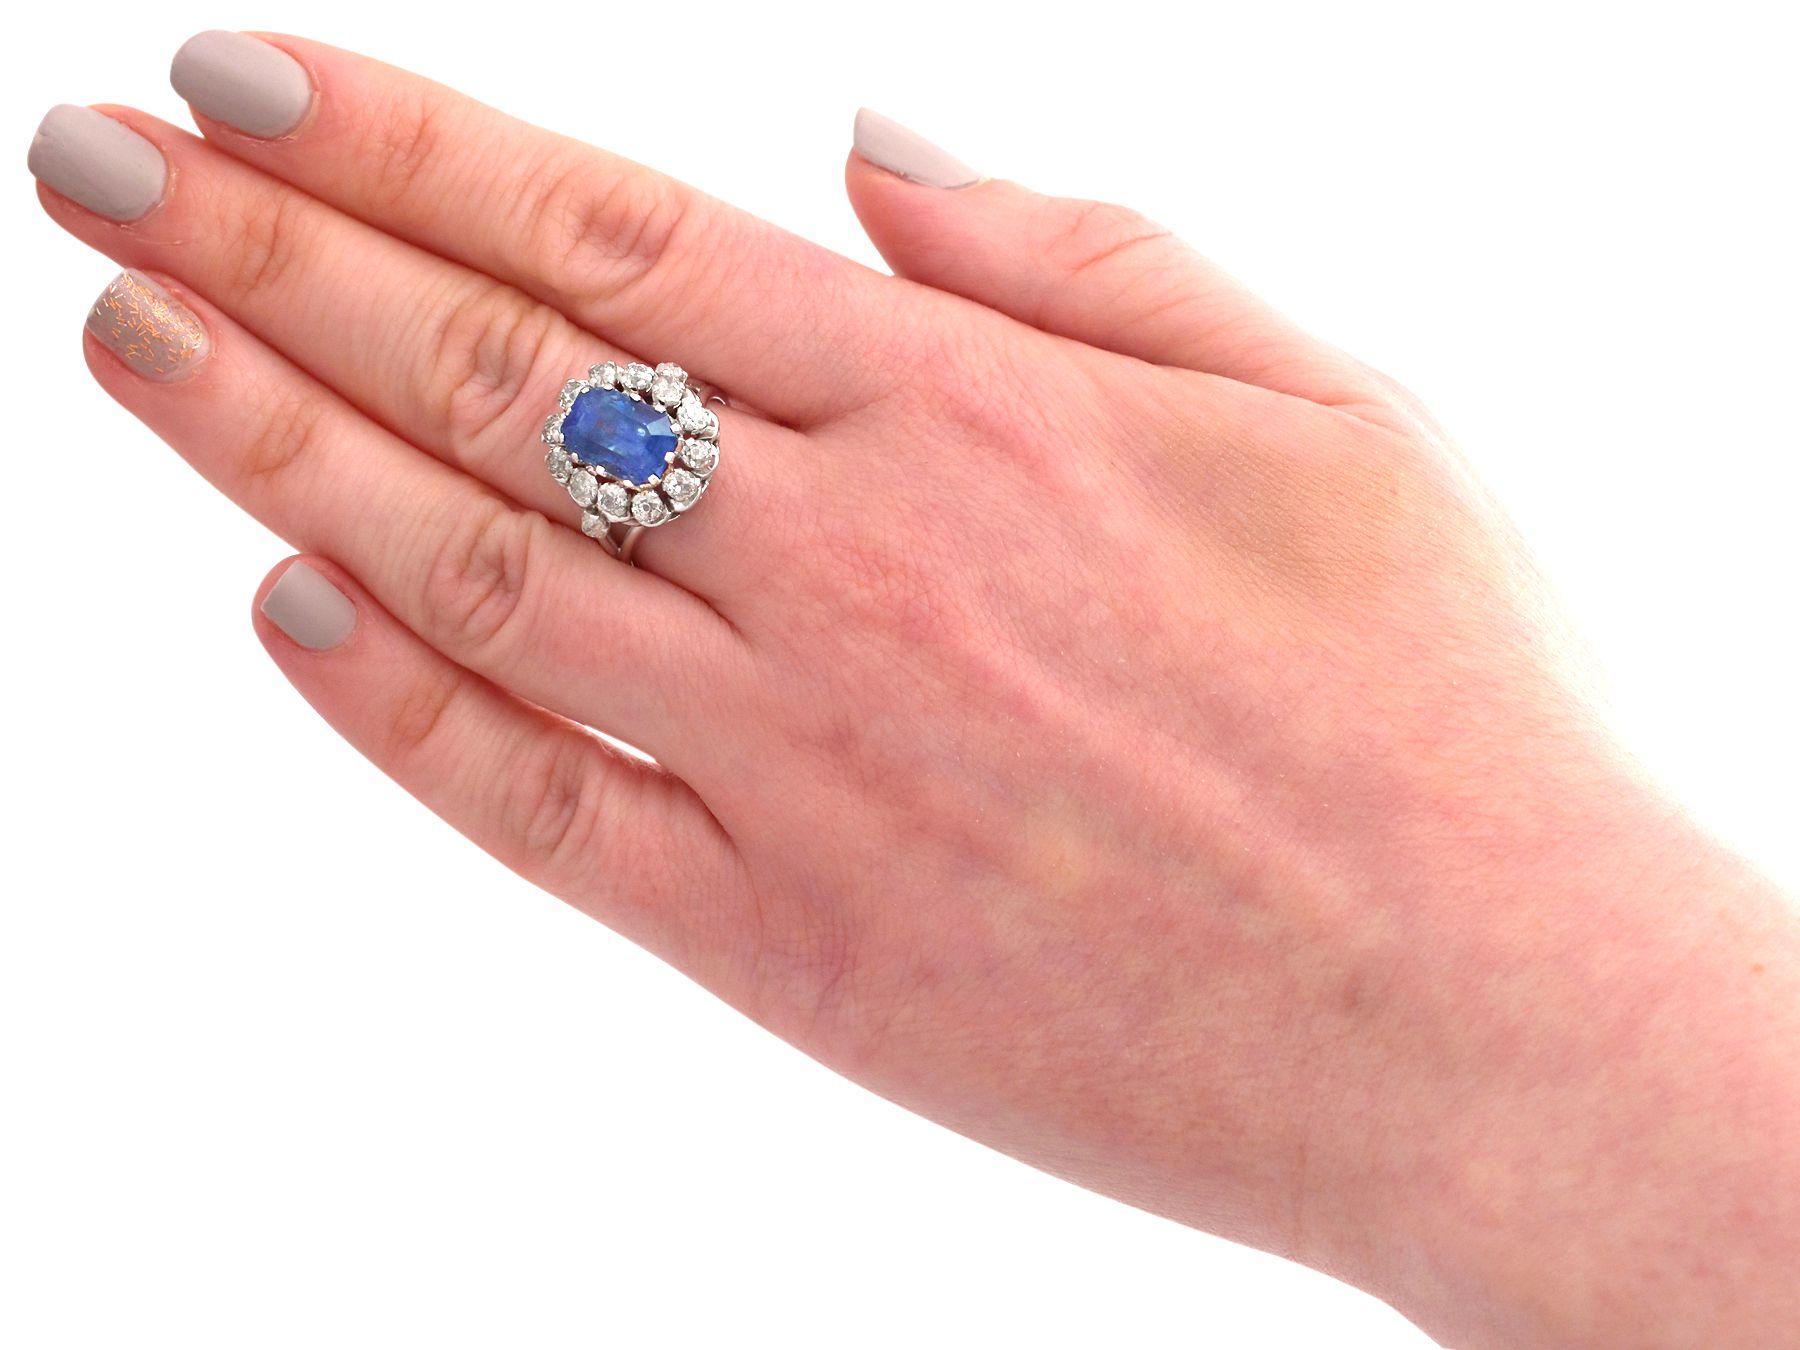 Romantic Vintage 1960s 6.53 Carat Sapphire and Diamond 18k White Gold Cocktail Ring